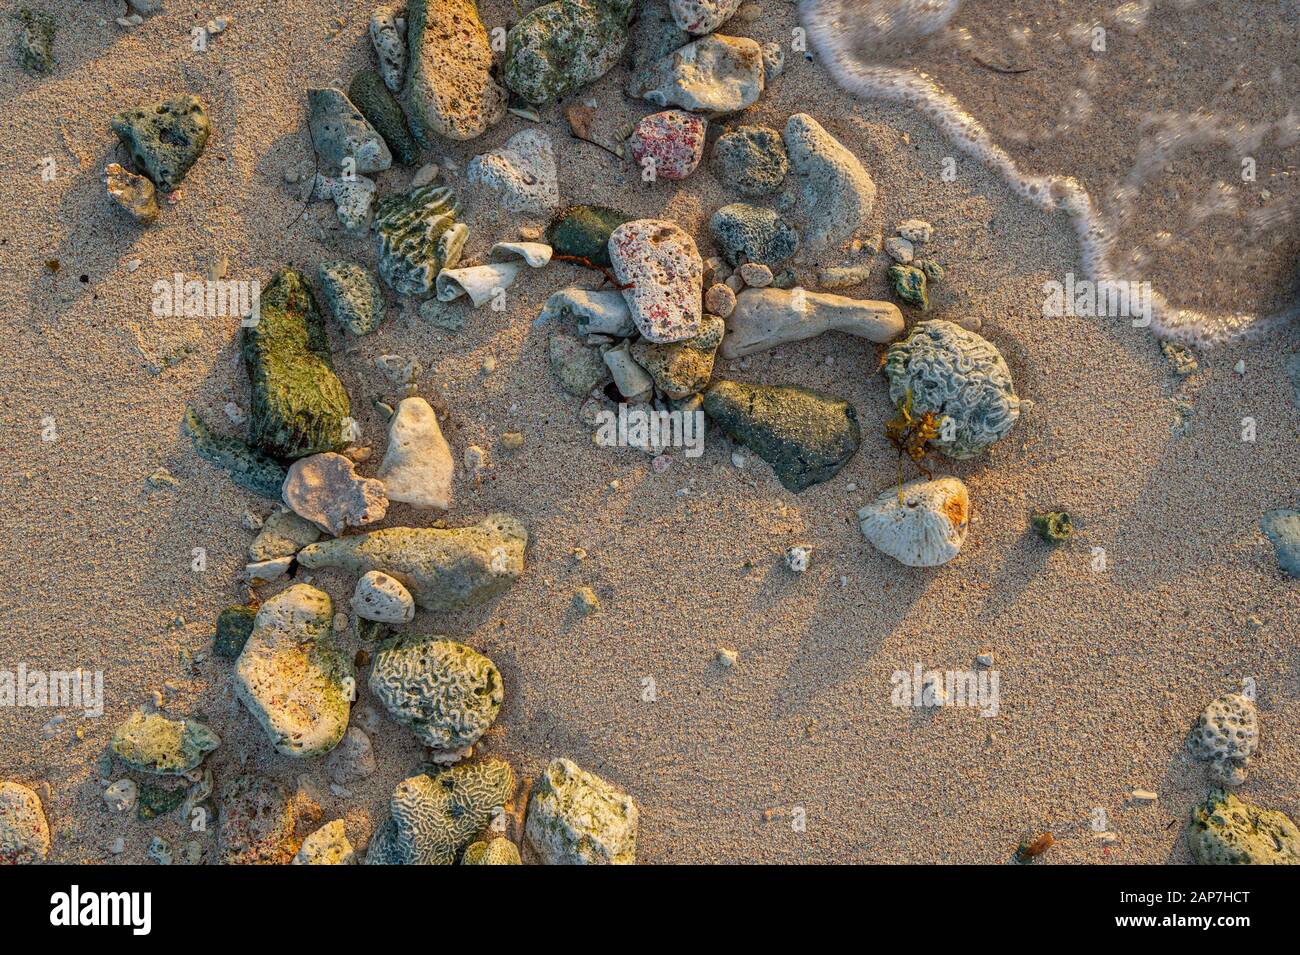 Coral & rocks on beach with surf Stock Photo